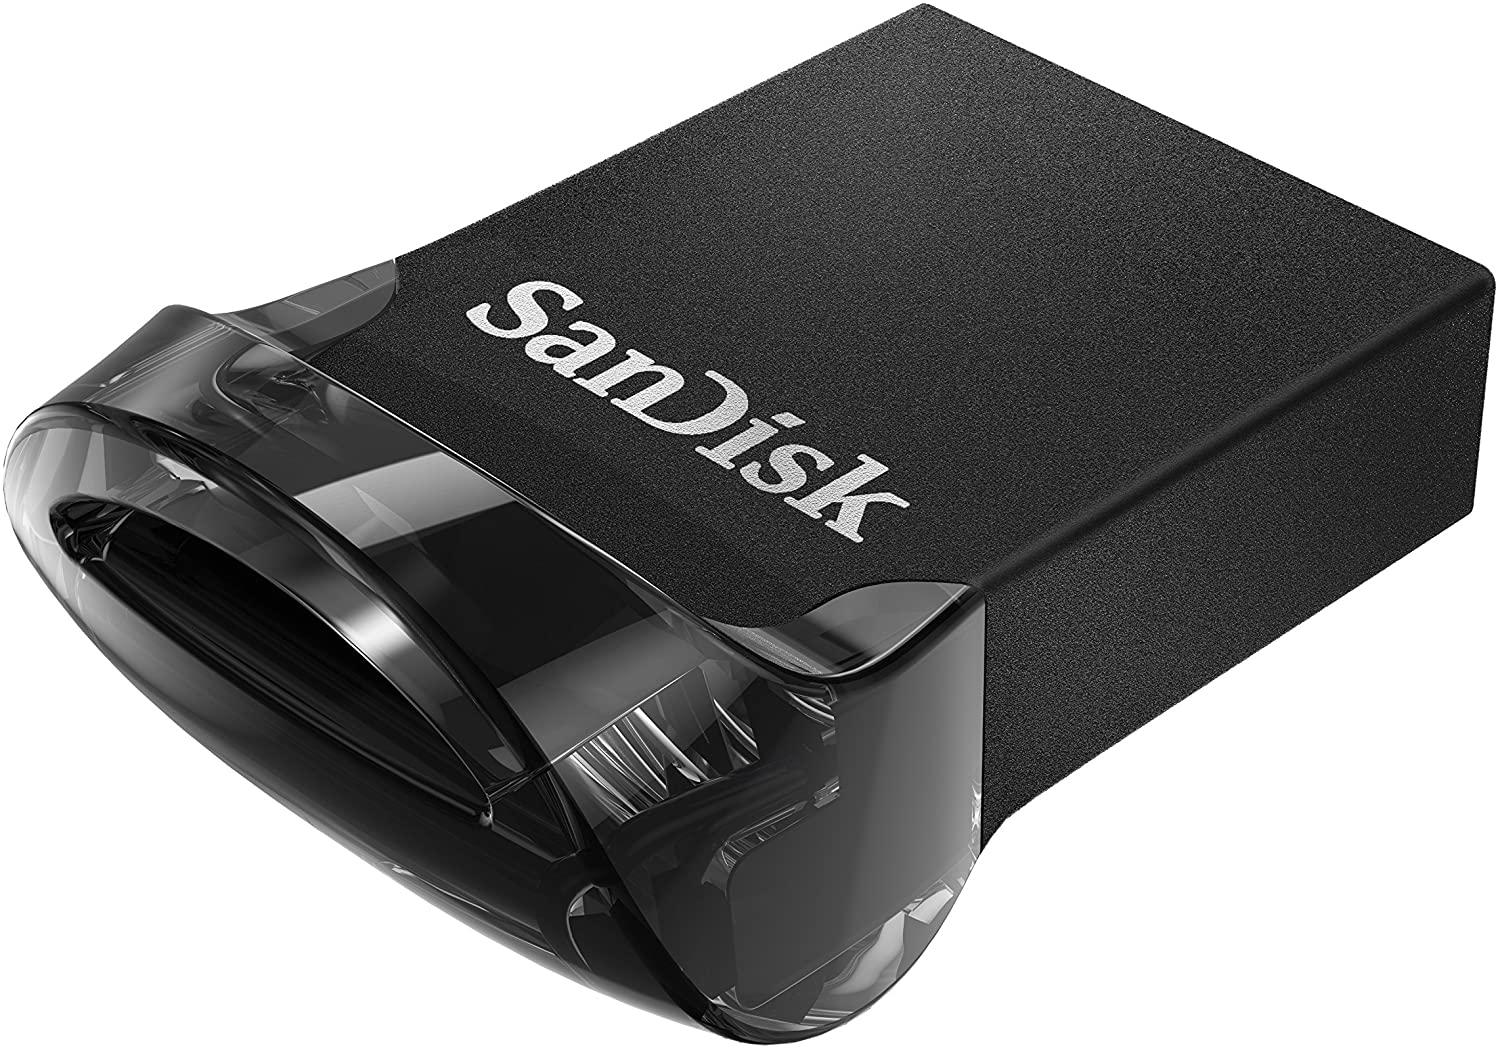 256GB SanDisk Ultra Fit USB 3.1 Flash Drive for $23.49